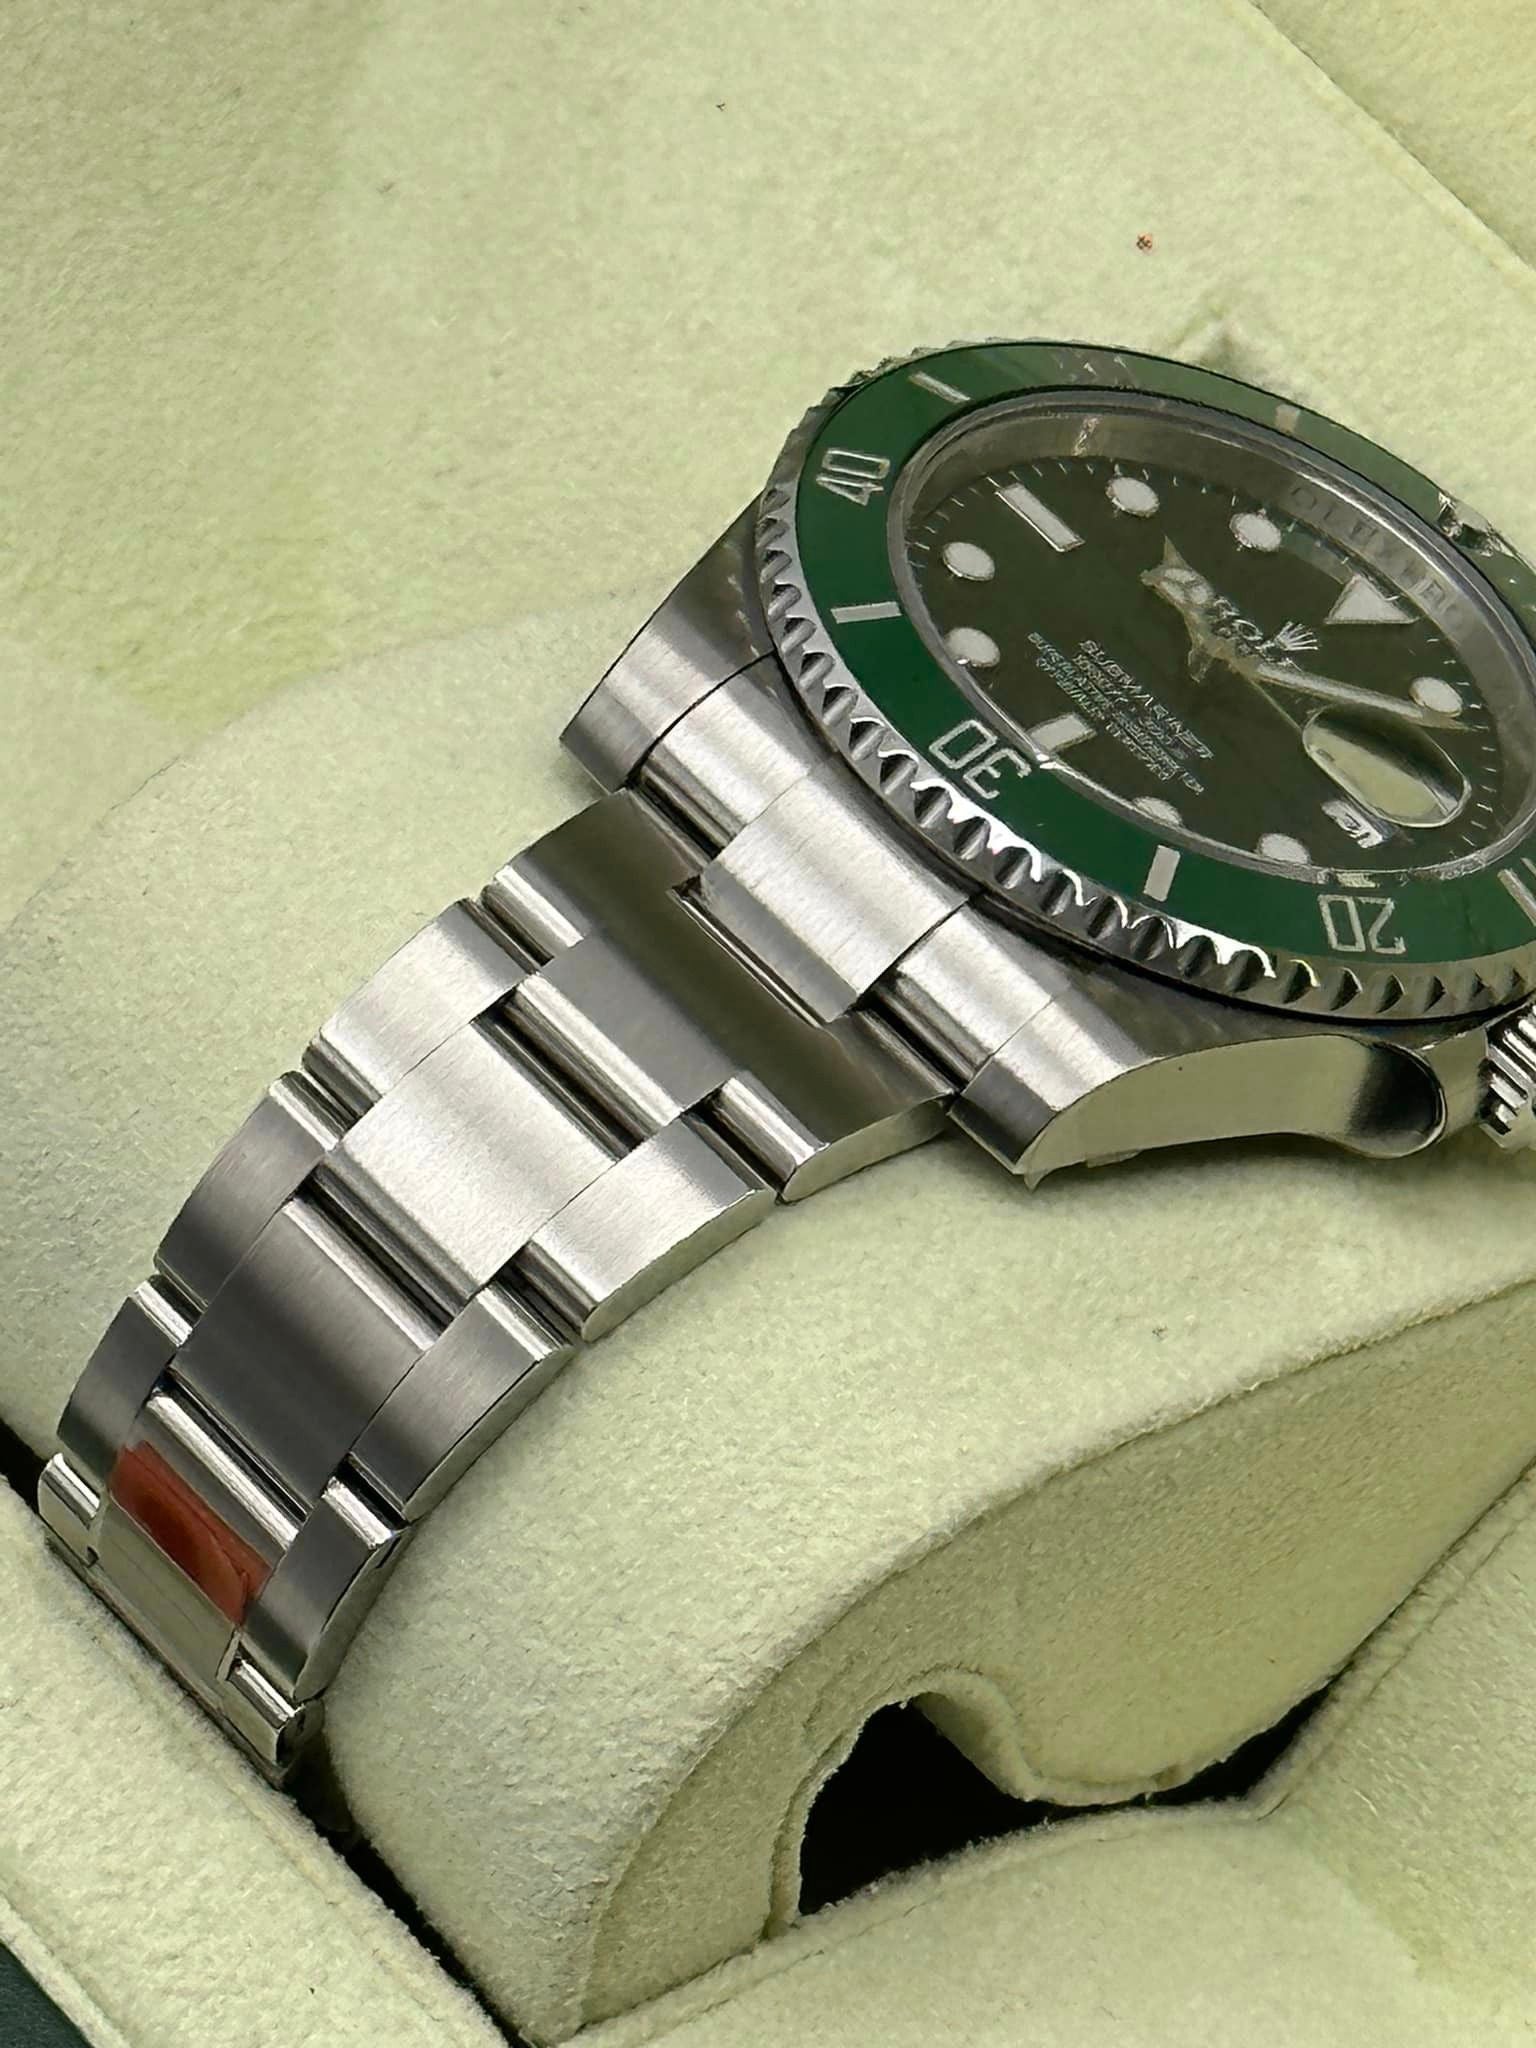 The Discontinued Rolex Submariner Hulk Price Increases in Resale